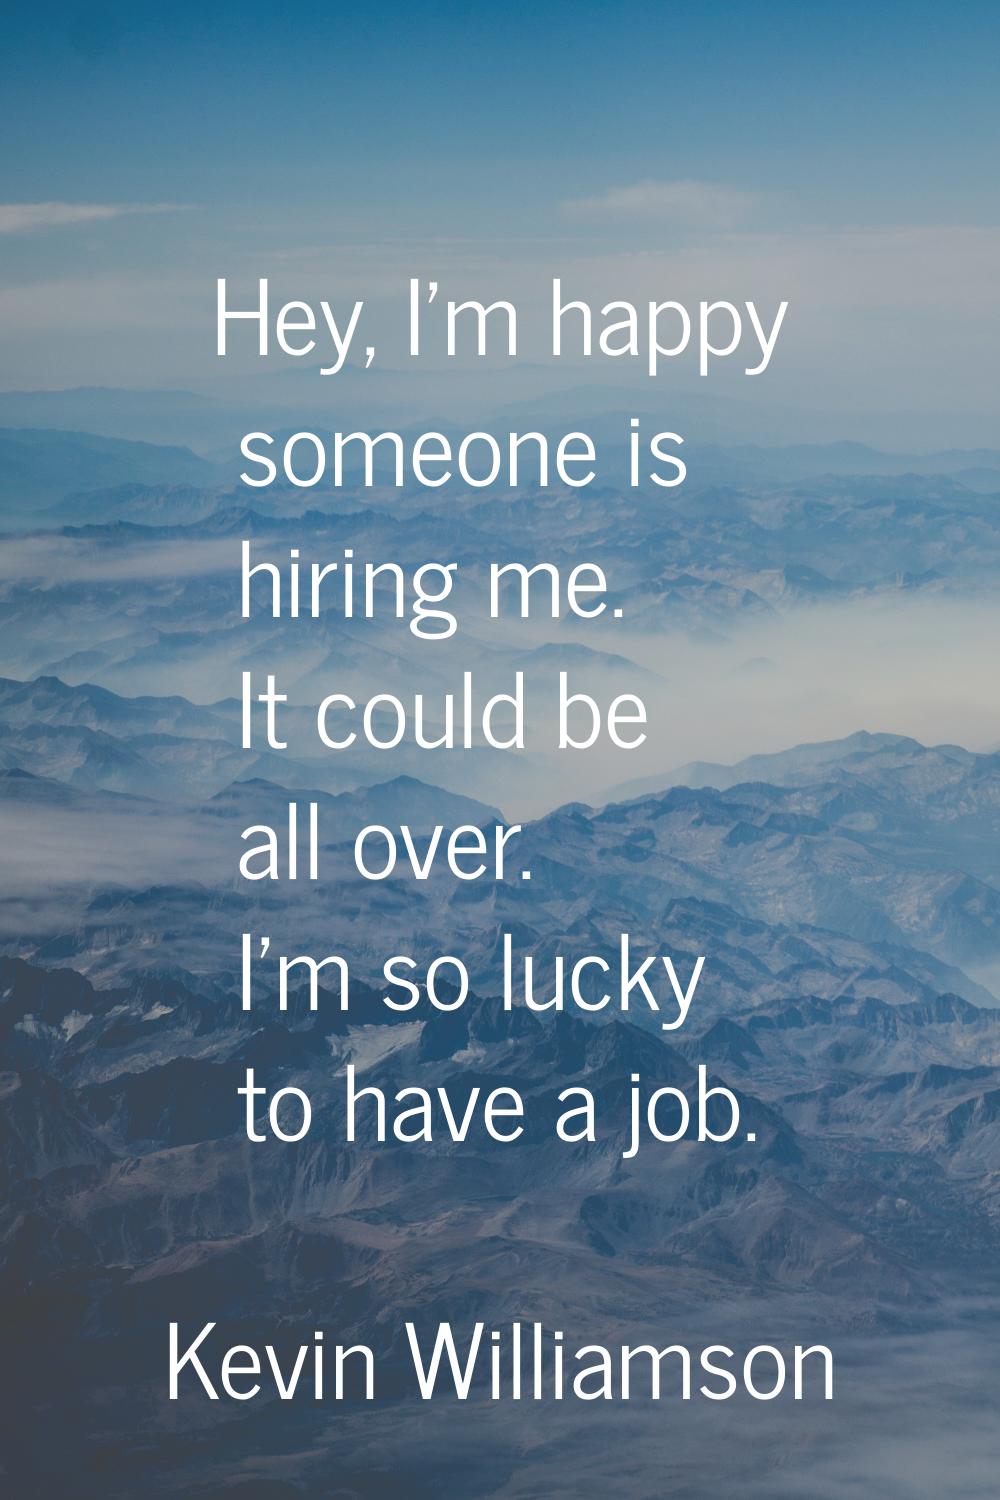 Hey, I'm happy someone is hiring me. It could be all over. I'm so lucky to have a job.